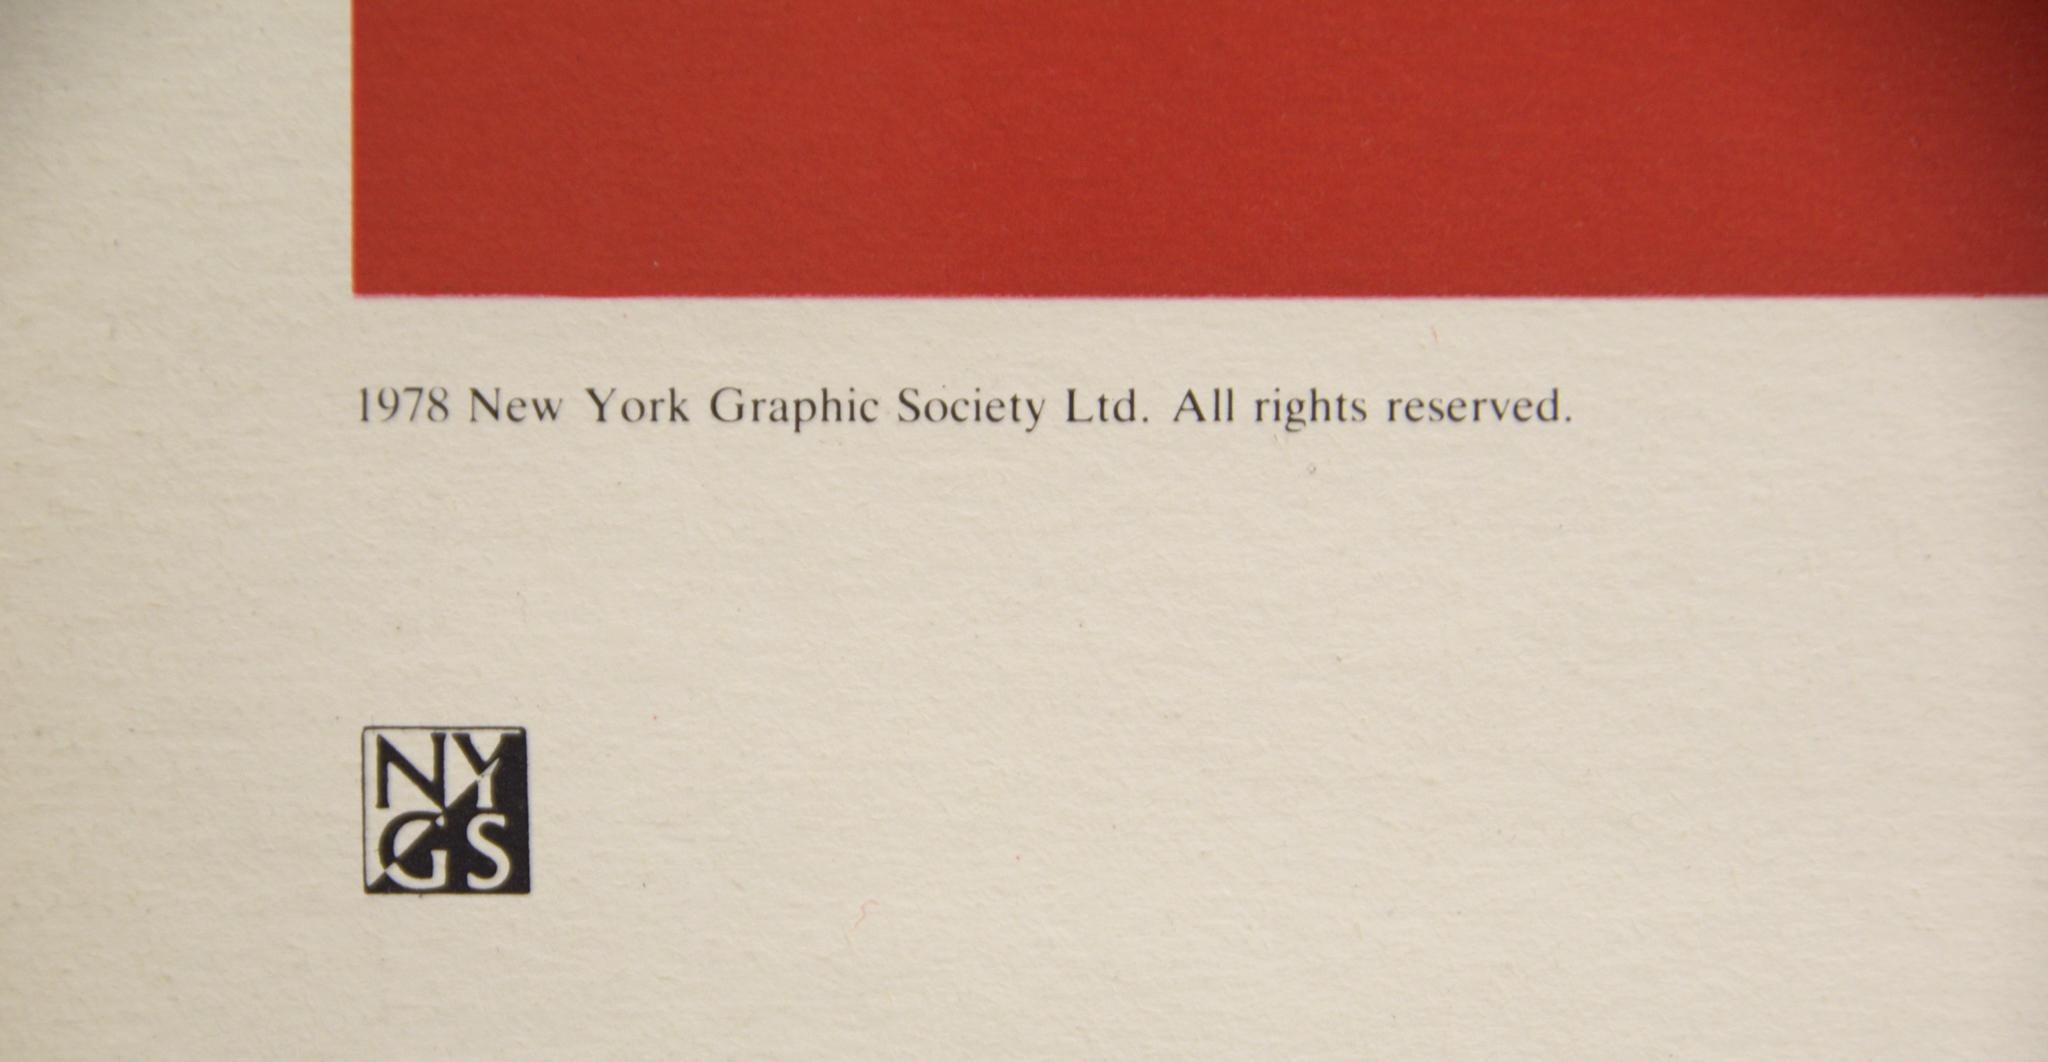 Published By New York Graphic Society
Printed In 1978
In Good Condition
Measures 39 x 17.5 in.